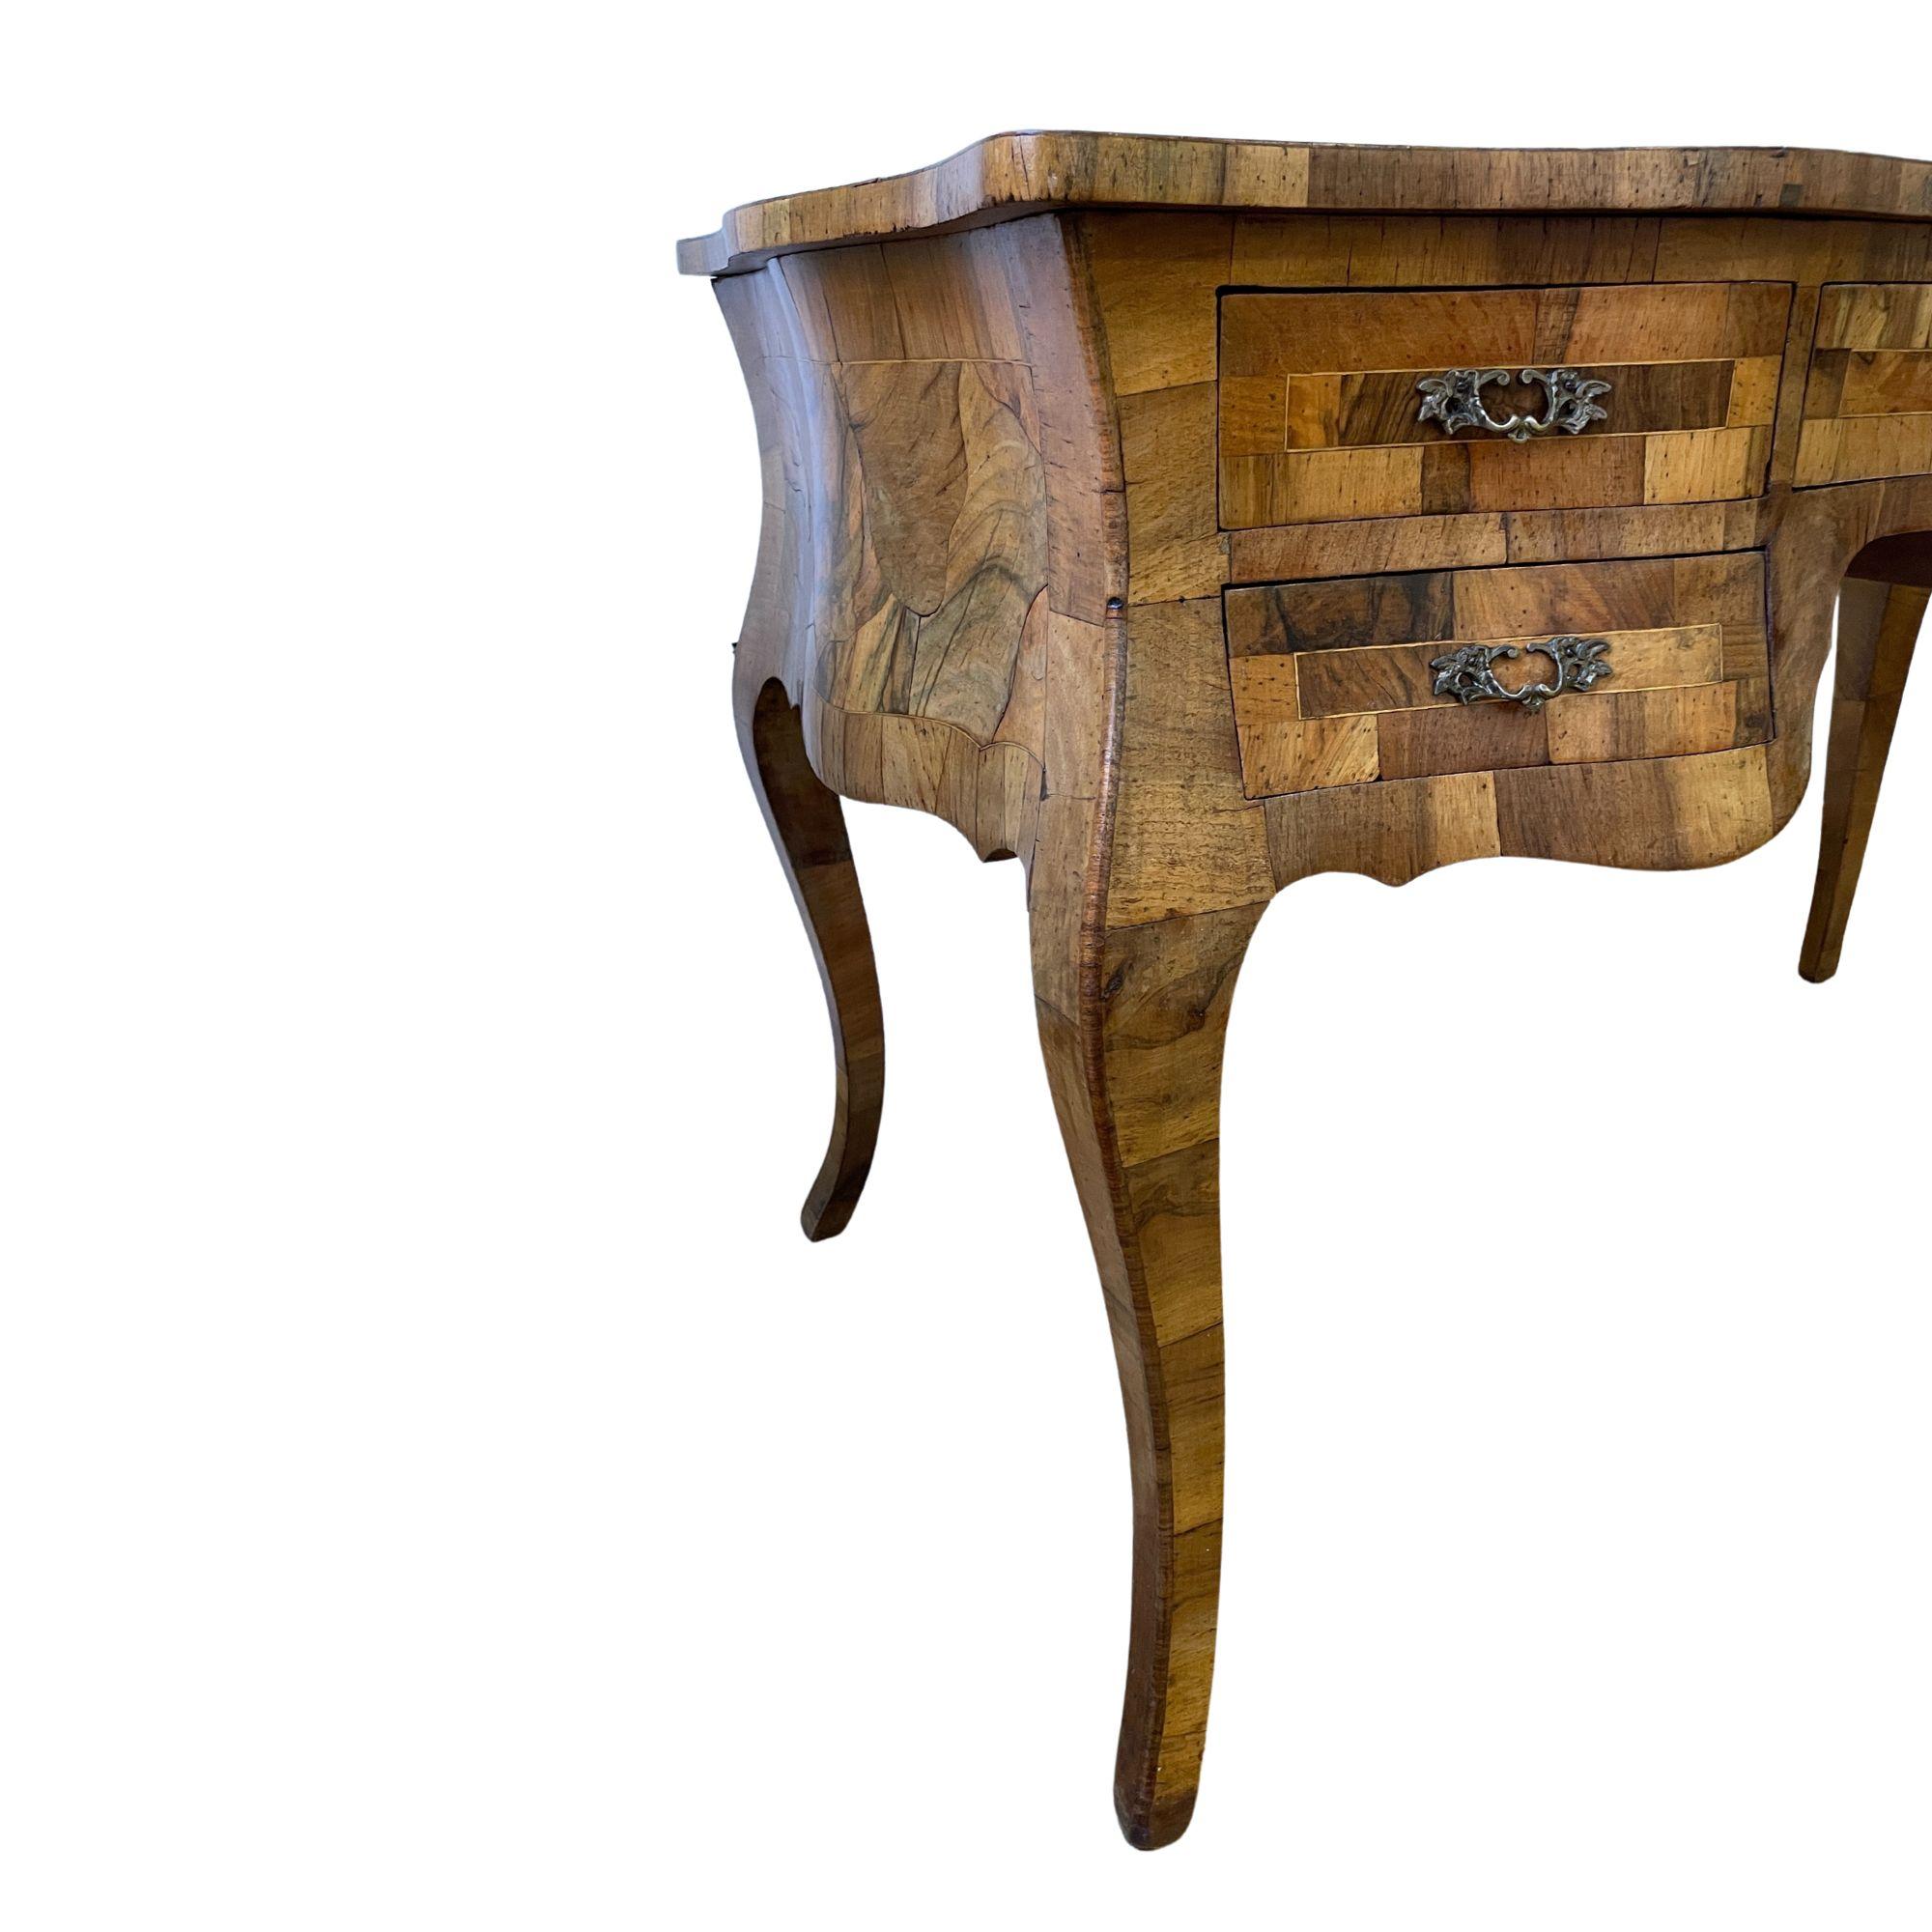 Hand-made Italian bombe burl bureau plat (writing desk) in the style of Louis XV. Patch olive and walnut burl with parquetry border on body of desk and each drawer. Curved forms are complimented by cabriole legs. Thought to be late 19th to mid-20th